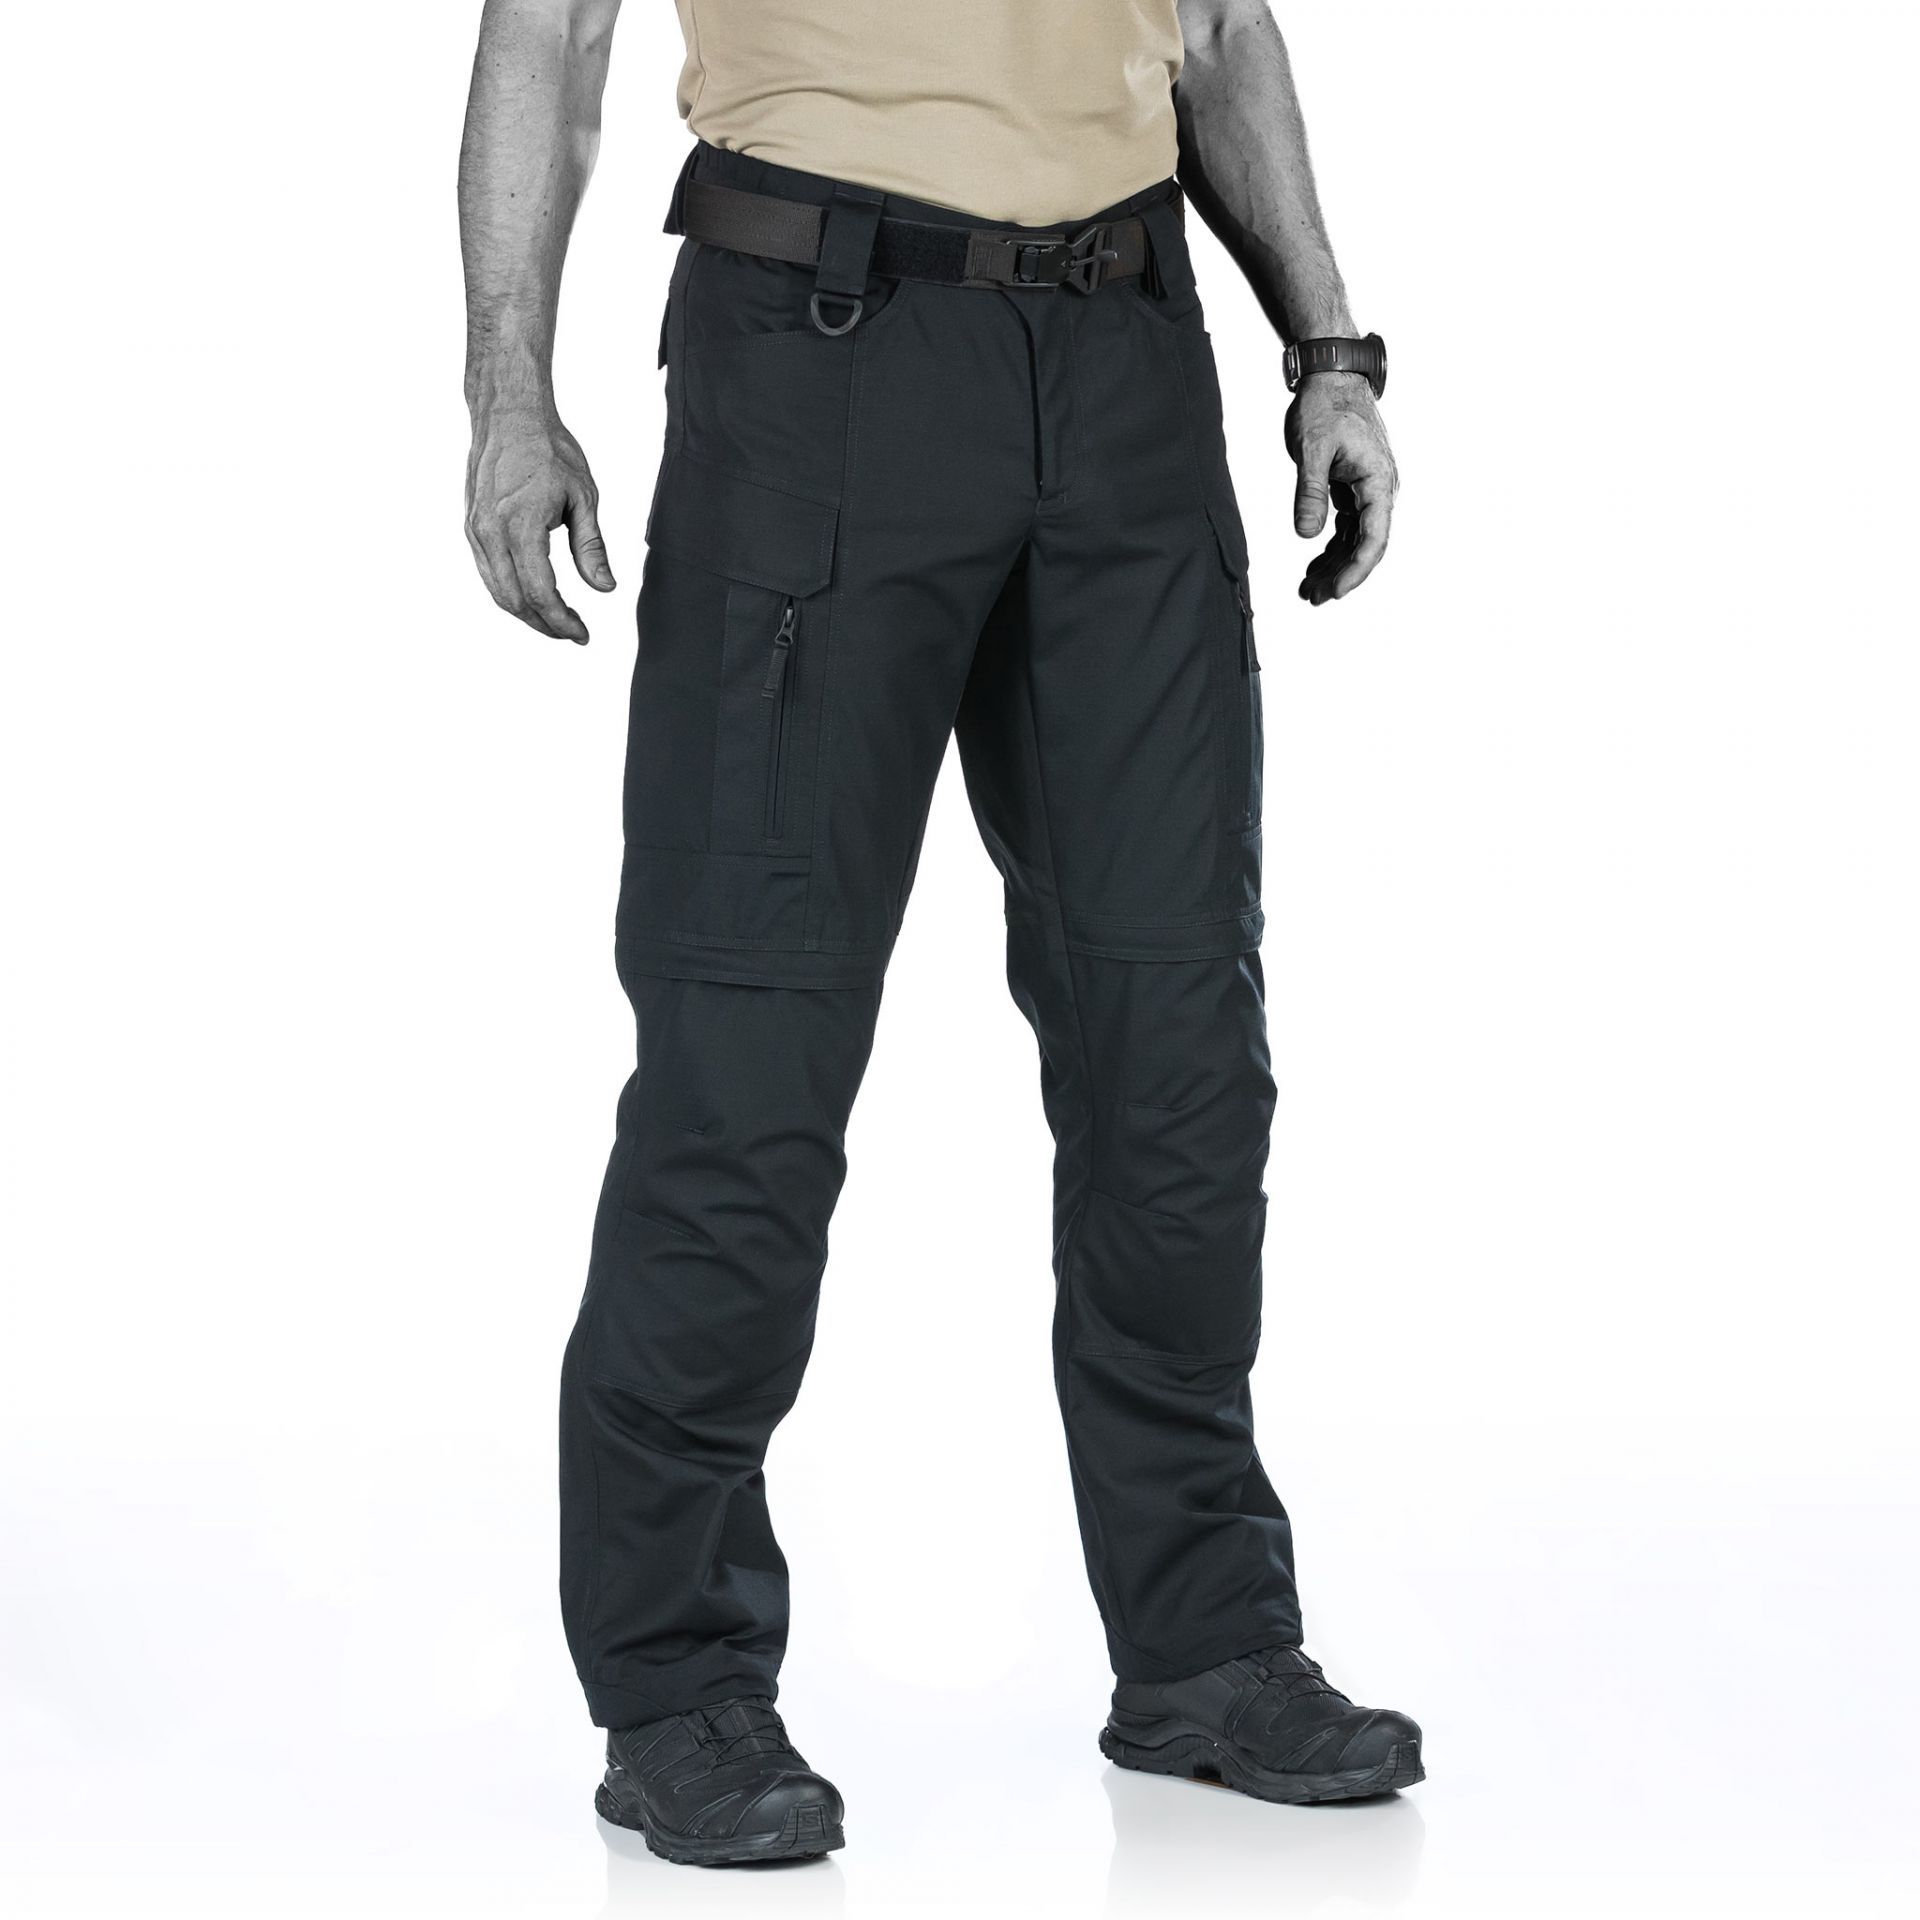 Eaglade Tactical Cargo Pants For Men In Green Ix9 | Shopee Philippines-hancorp34.com.vn